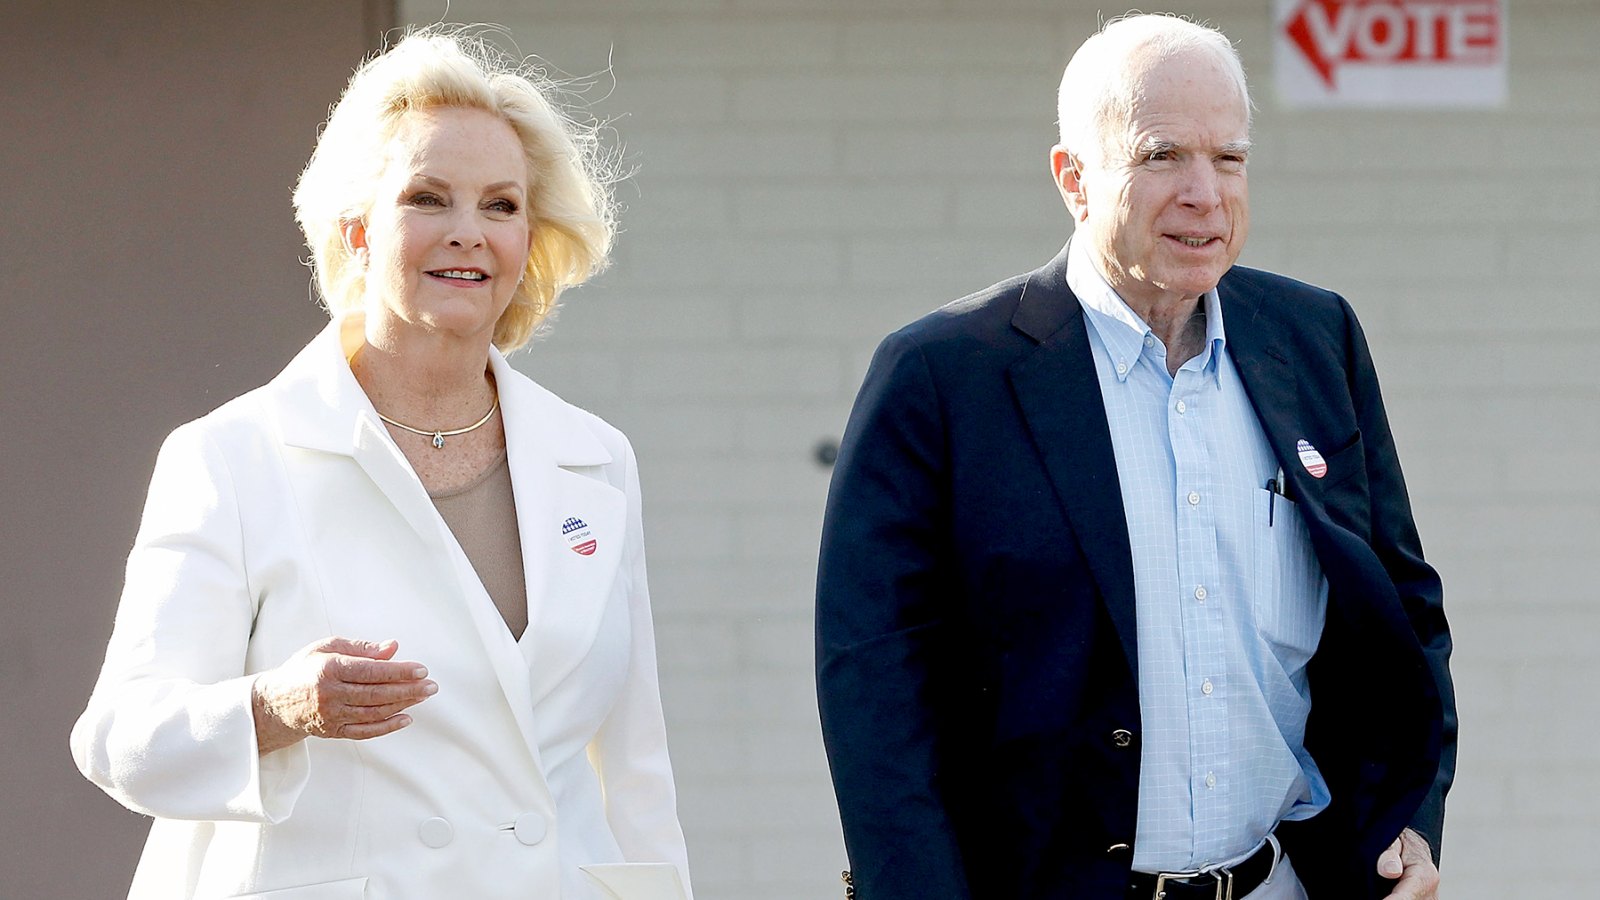 John McCain and his wife Cindy exit the Mountain View Christian Church polling place after casting their vote on November 8, 2016 in Phoenix, Arizona.